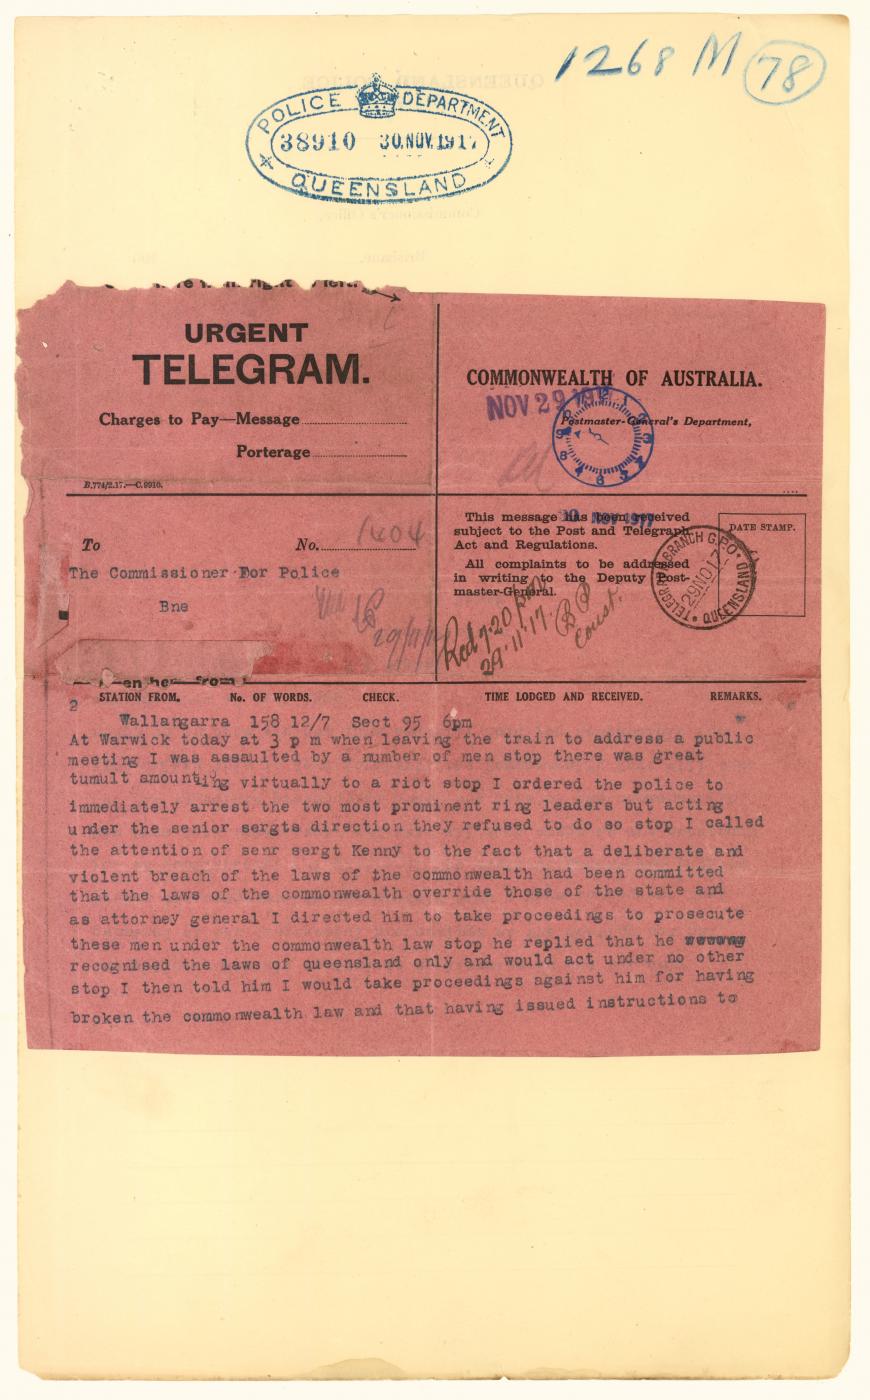 Telegram from Prime Minister W M Hughes to the Commissioner for Police on being assaulted during a public meeting at Warwick and the refusal of the police to arrest the ring leaders.